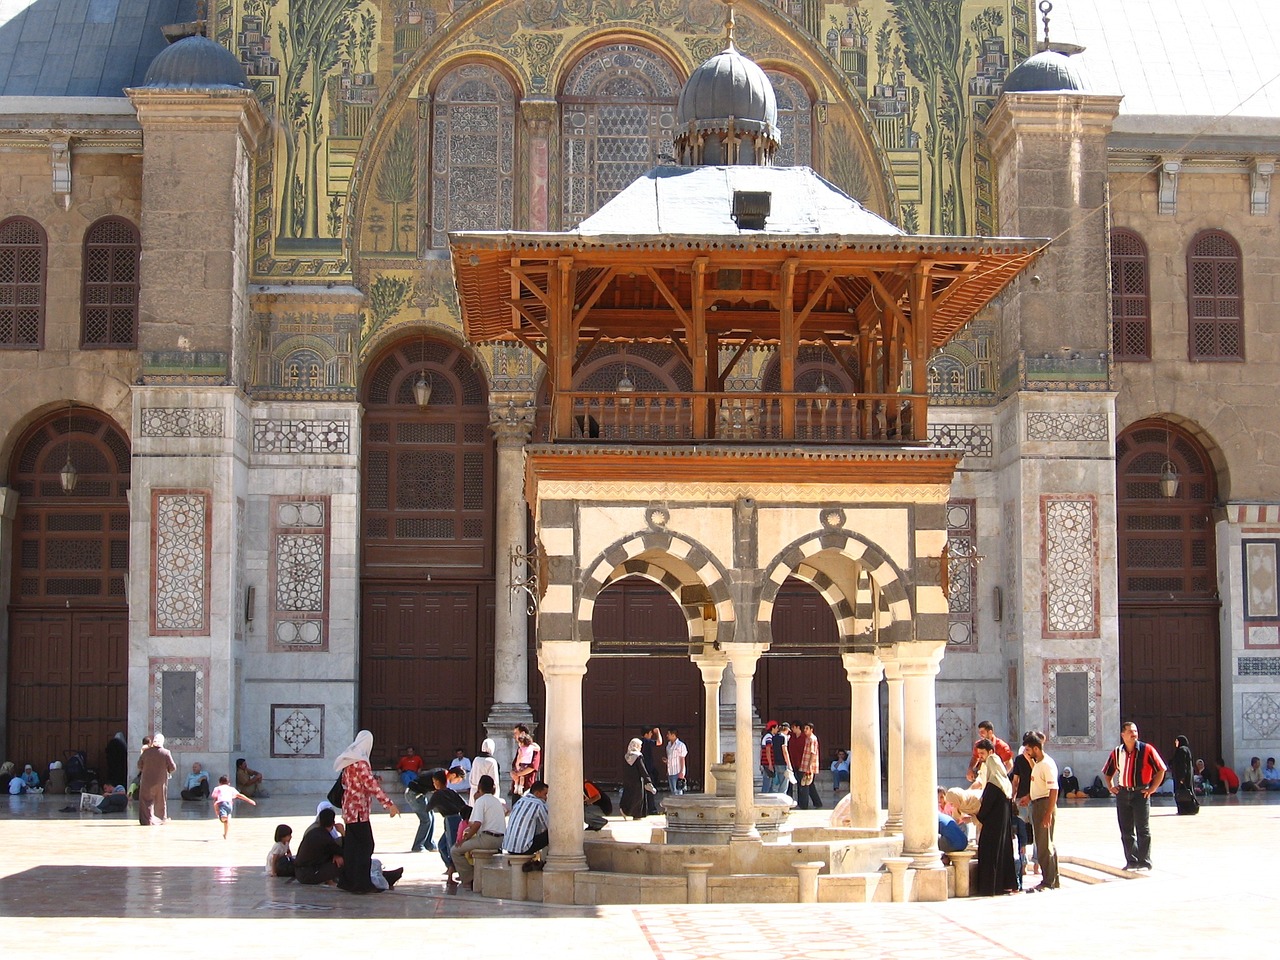 The Umayyad Mosque - Aleppo's Enduring Influence on Islamic Art and Architecture